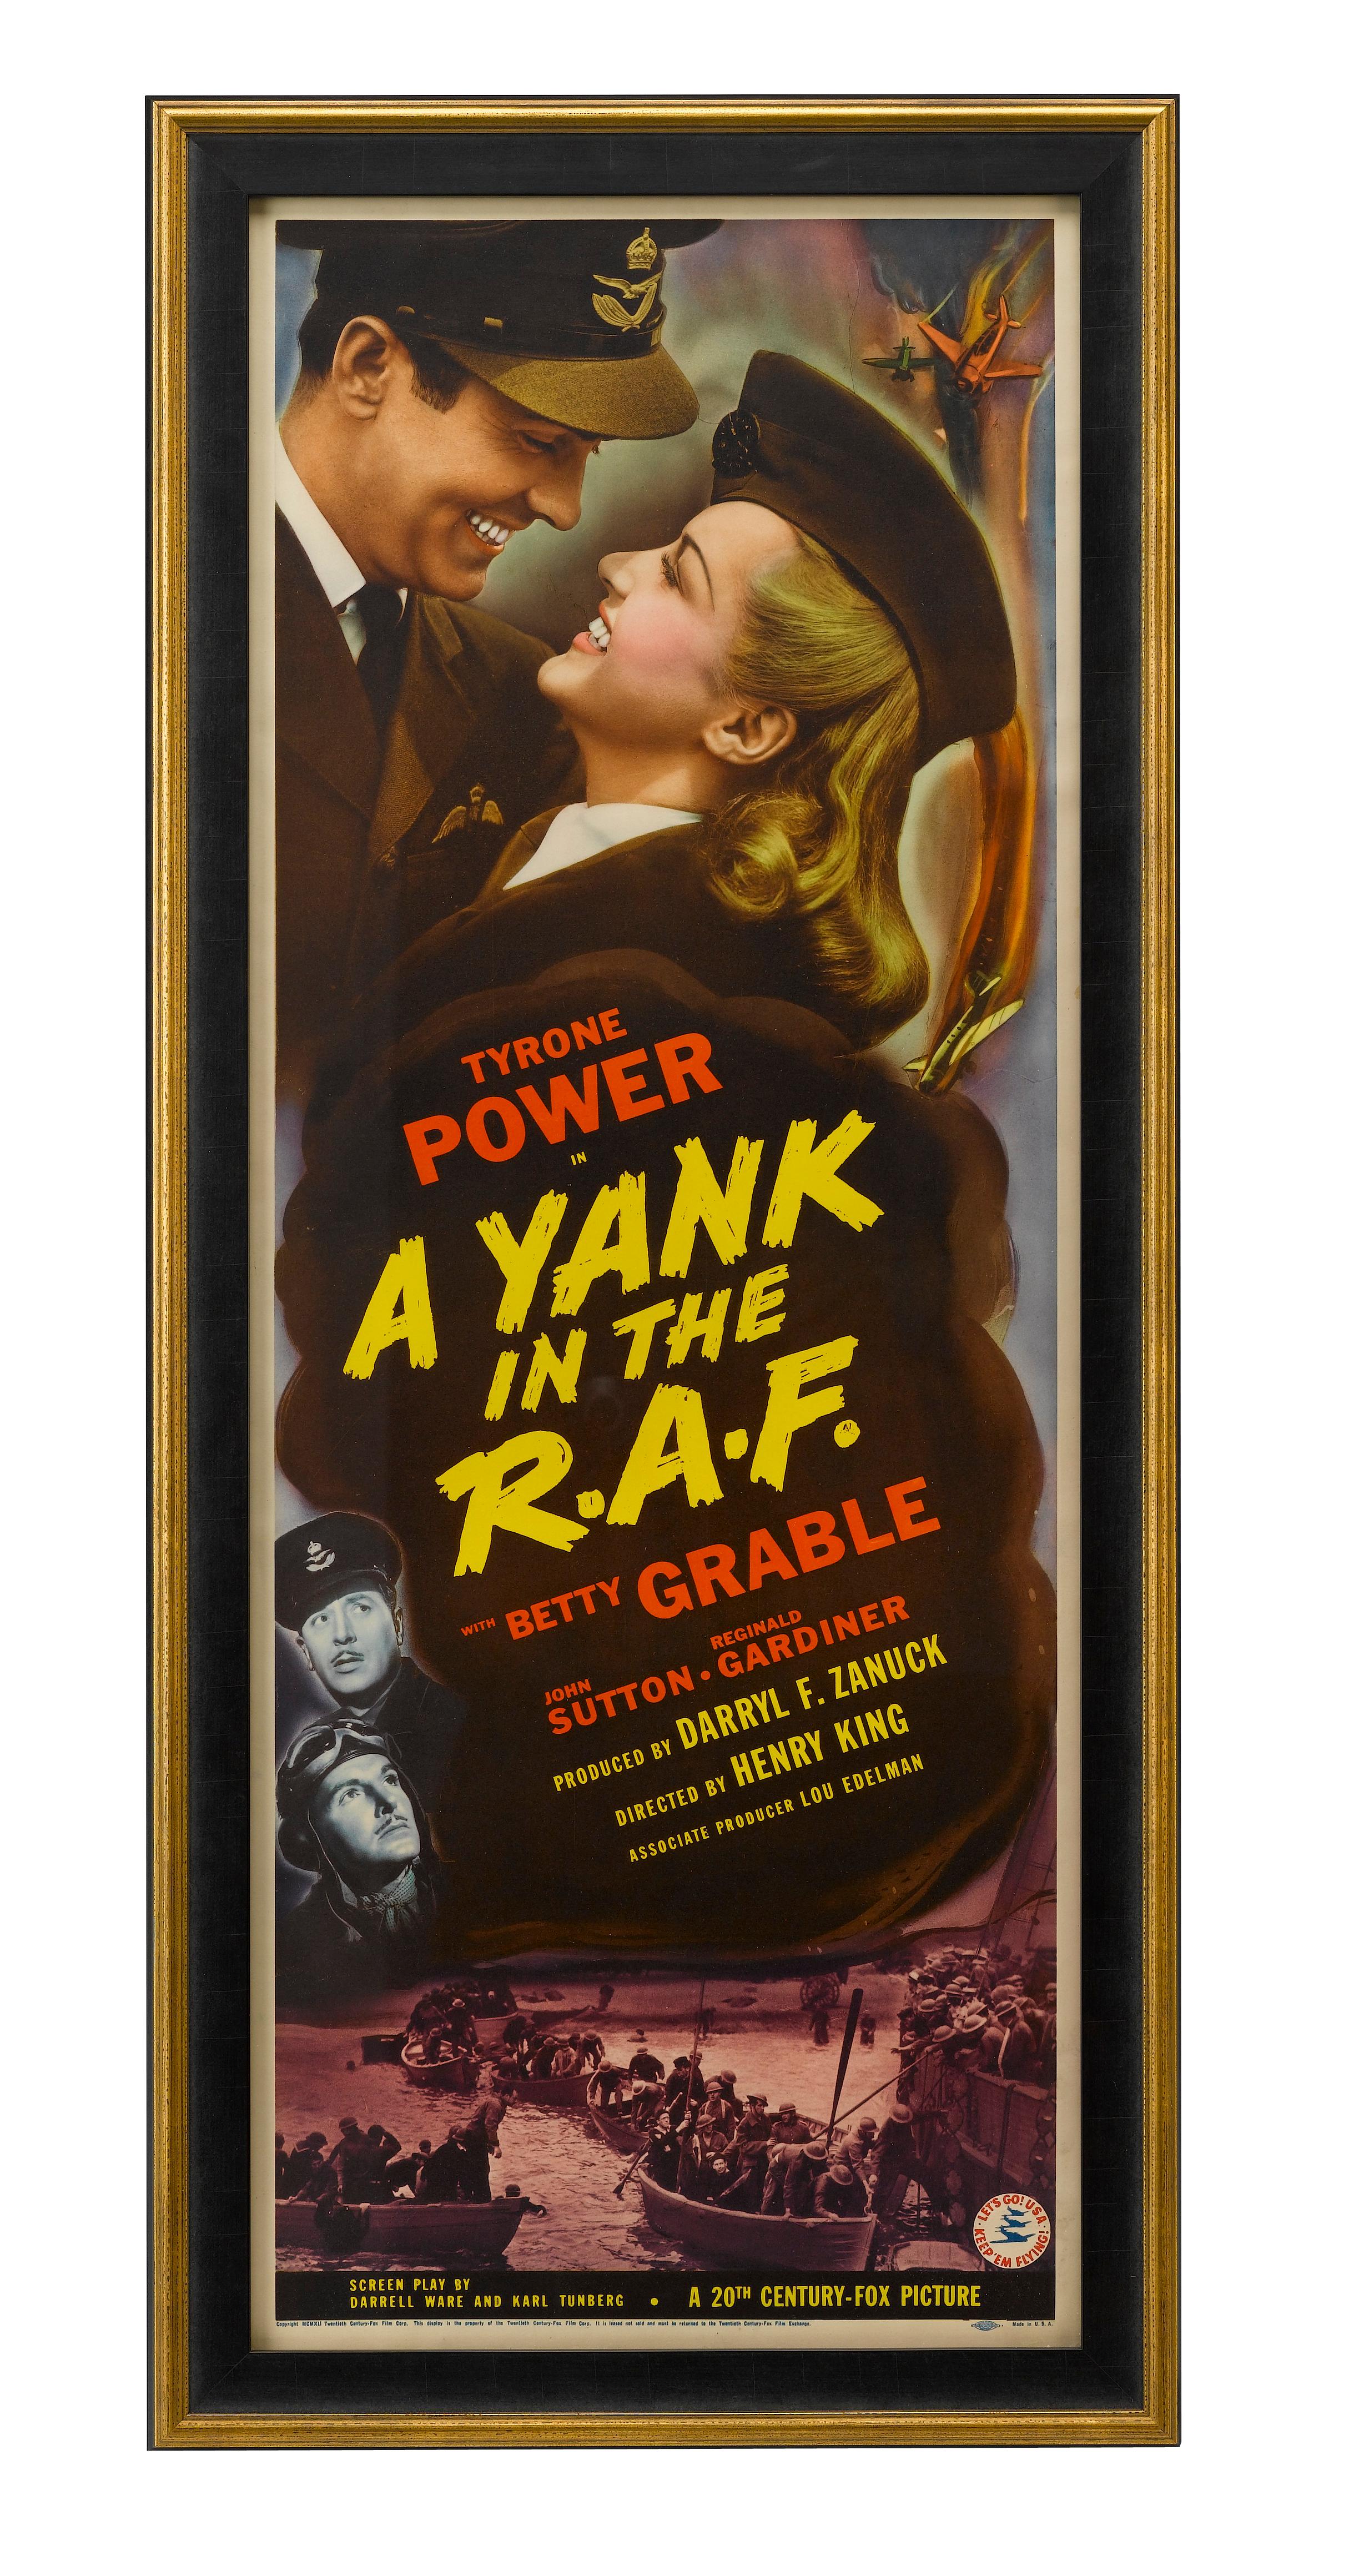 This colorful lithographic poster depicts the popular 1941 film A Yank in the R.A.F., directed by Henry King and produced by Twentieth Century-Fox. The black-and-white film describes a story that takes place early during World War II, in which a